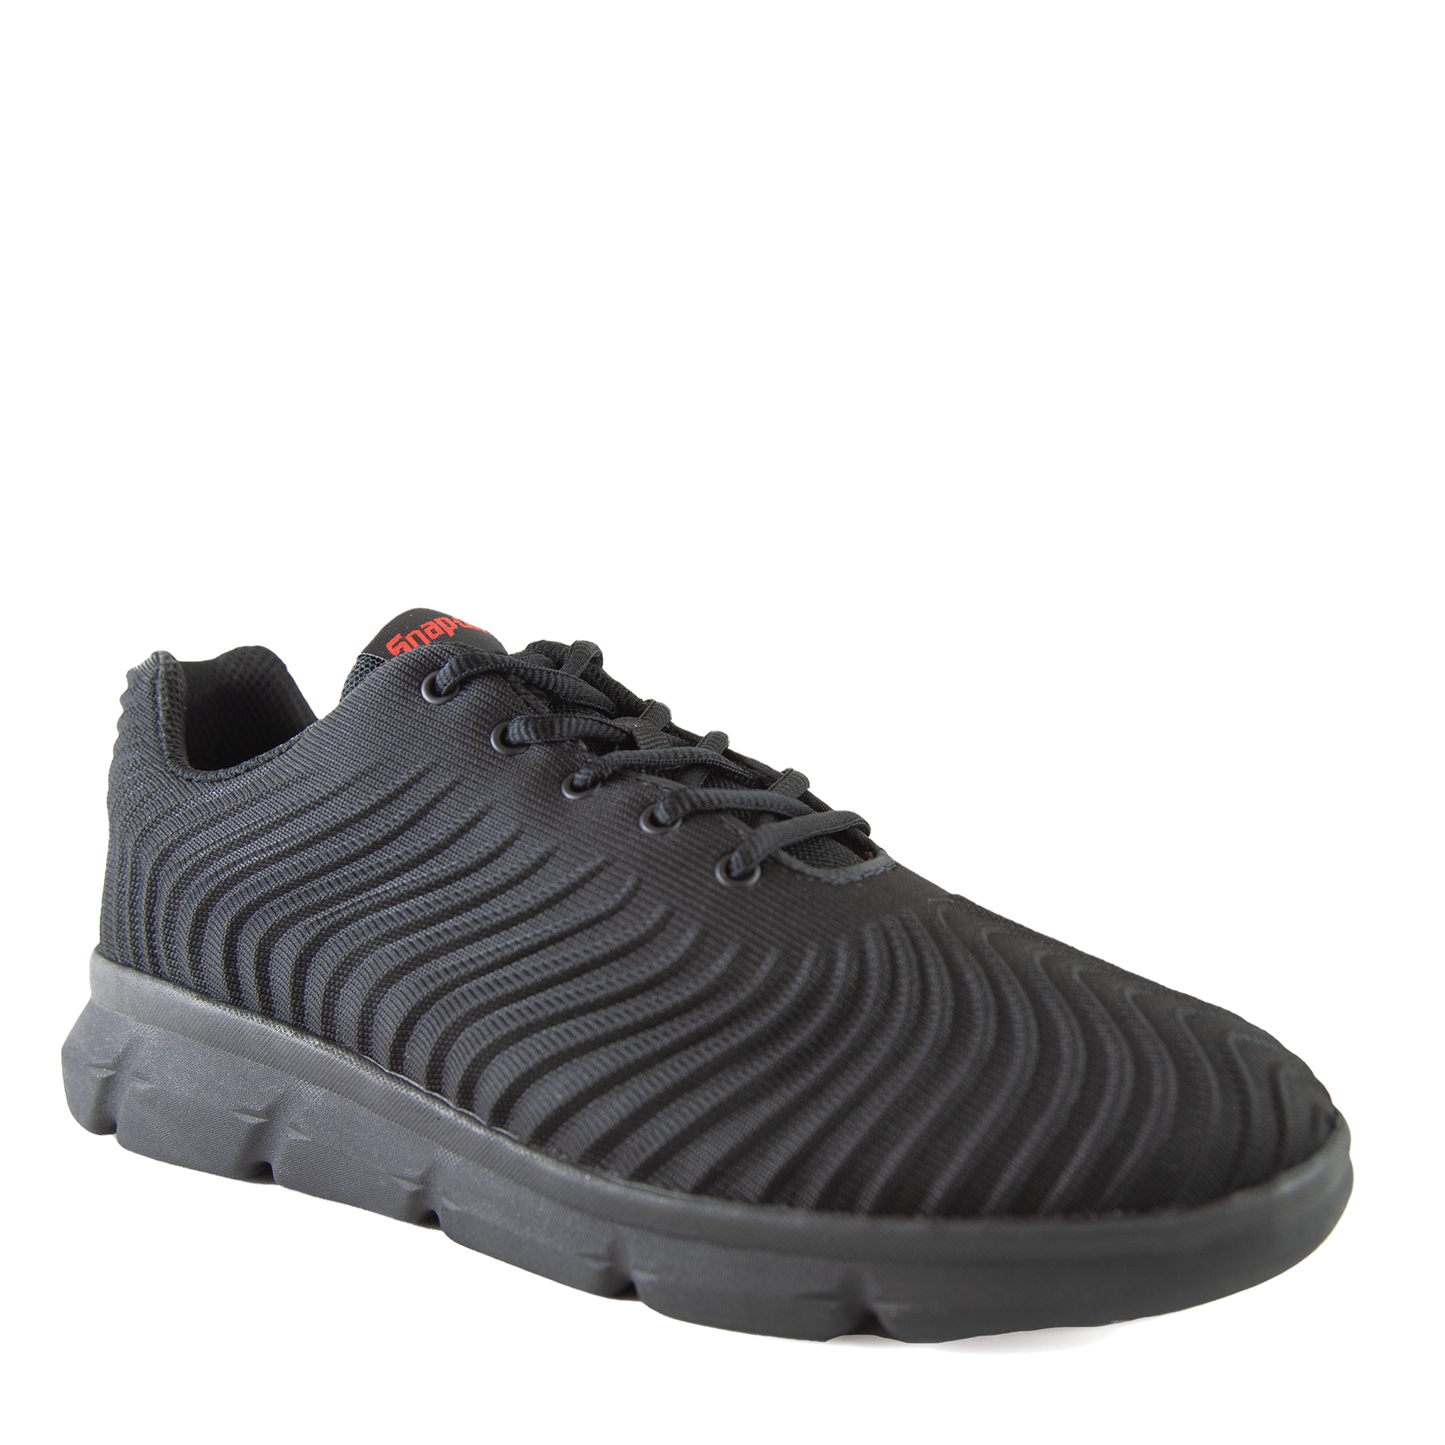 Snap-on Octane Wave, Casual Athletic Footwear *Not To Be Worn In Shops